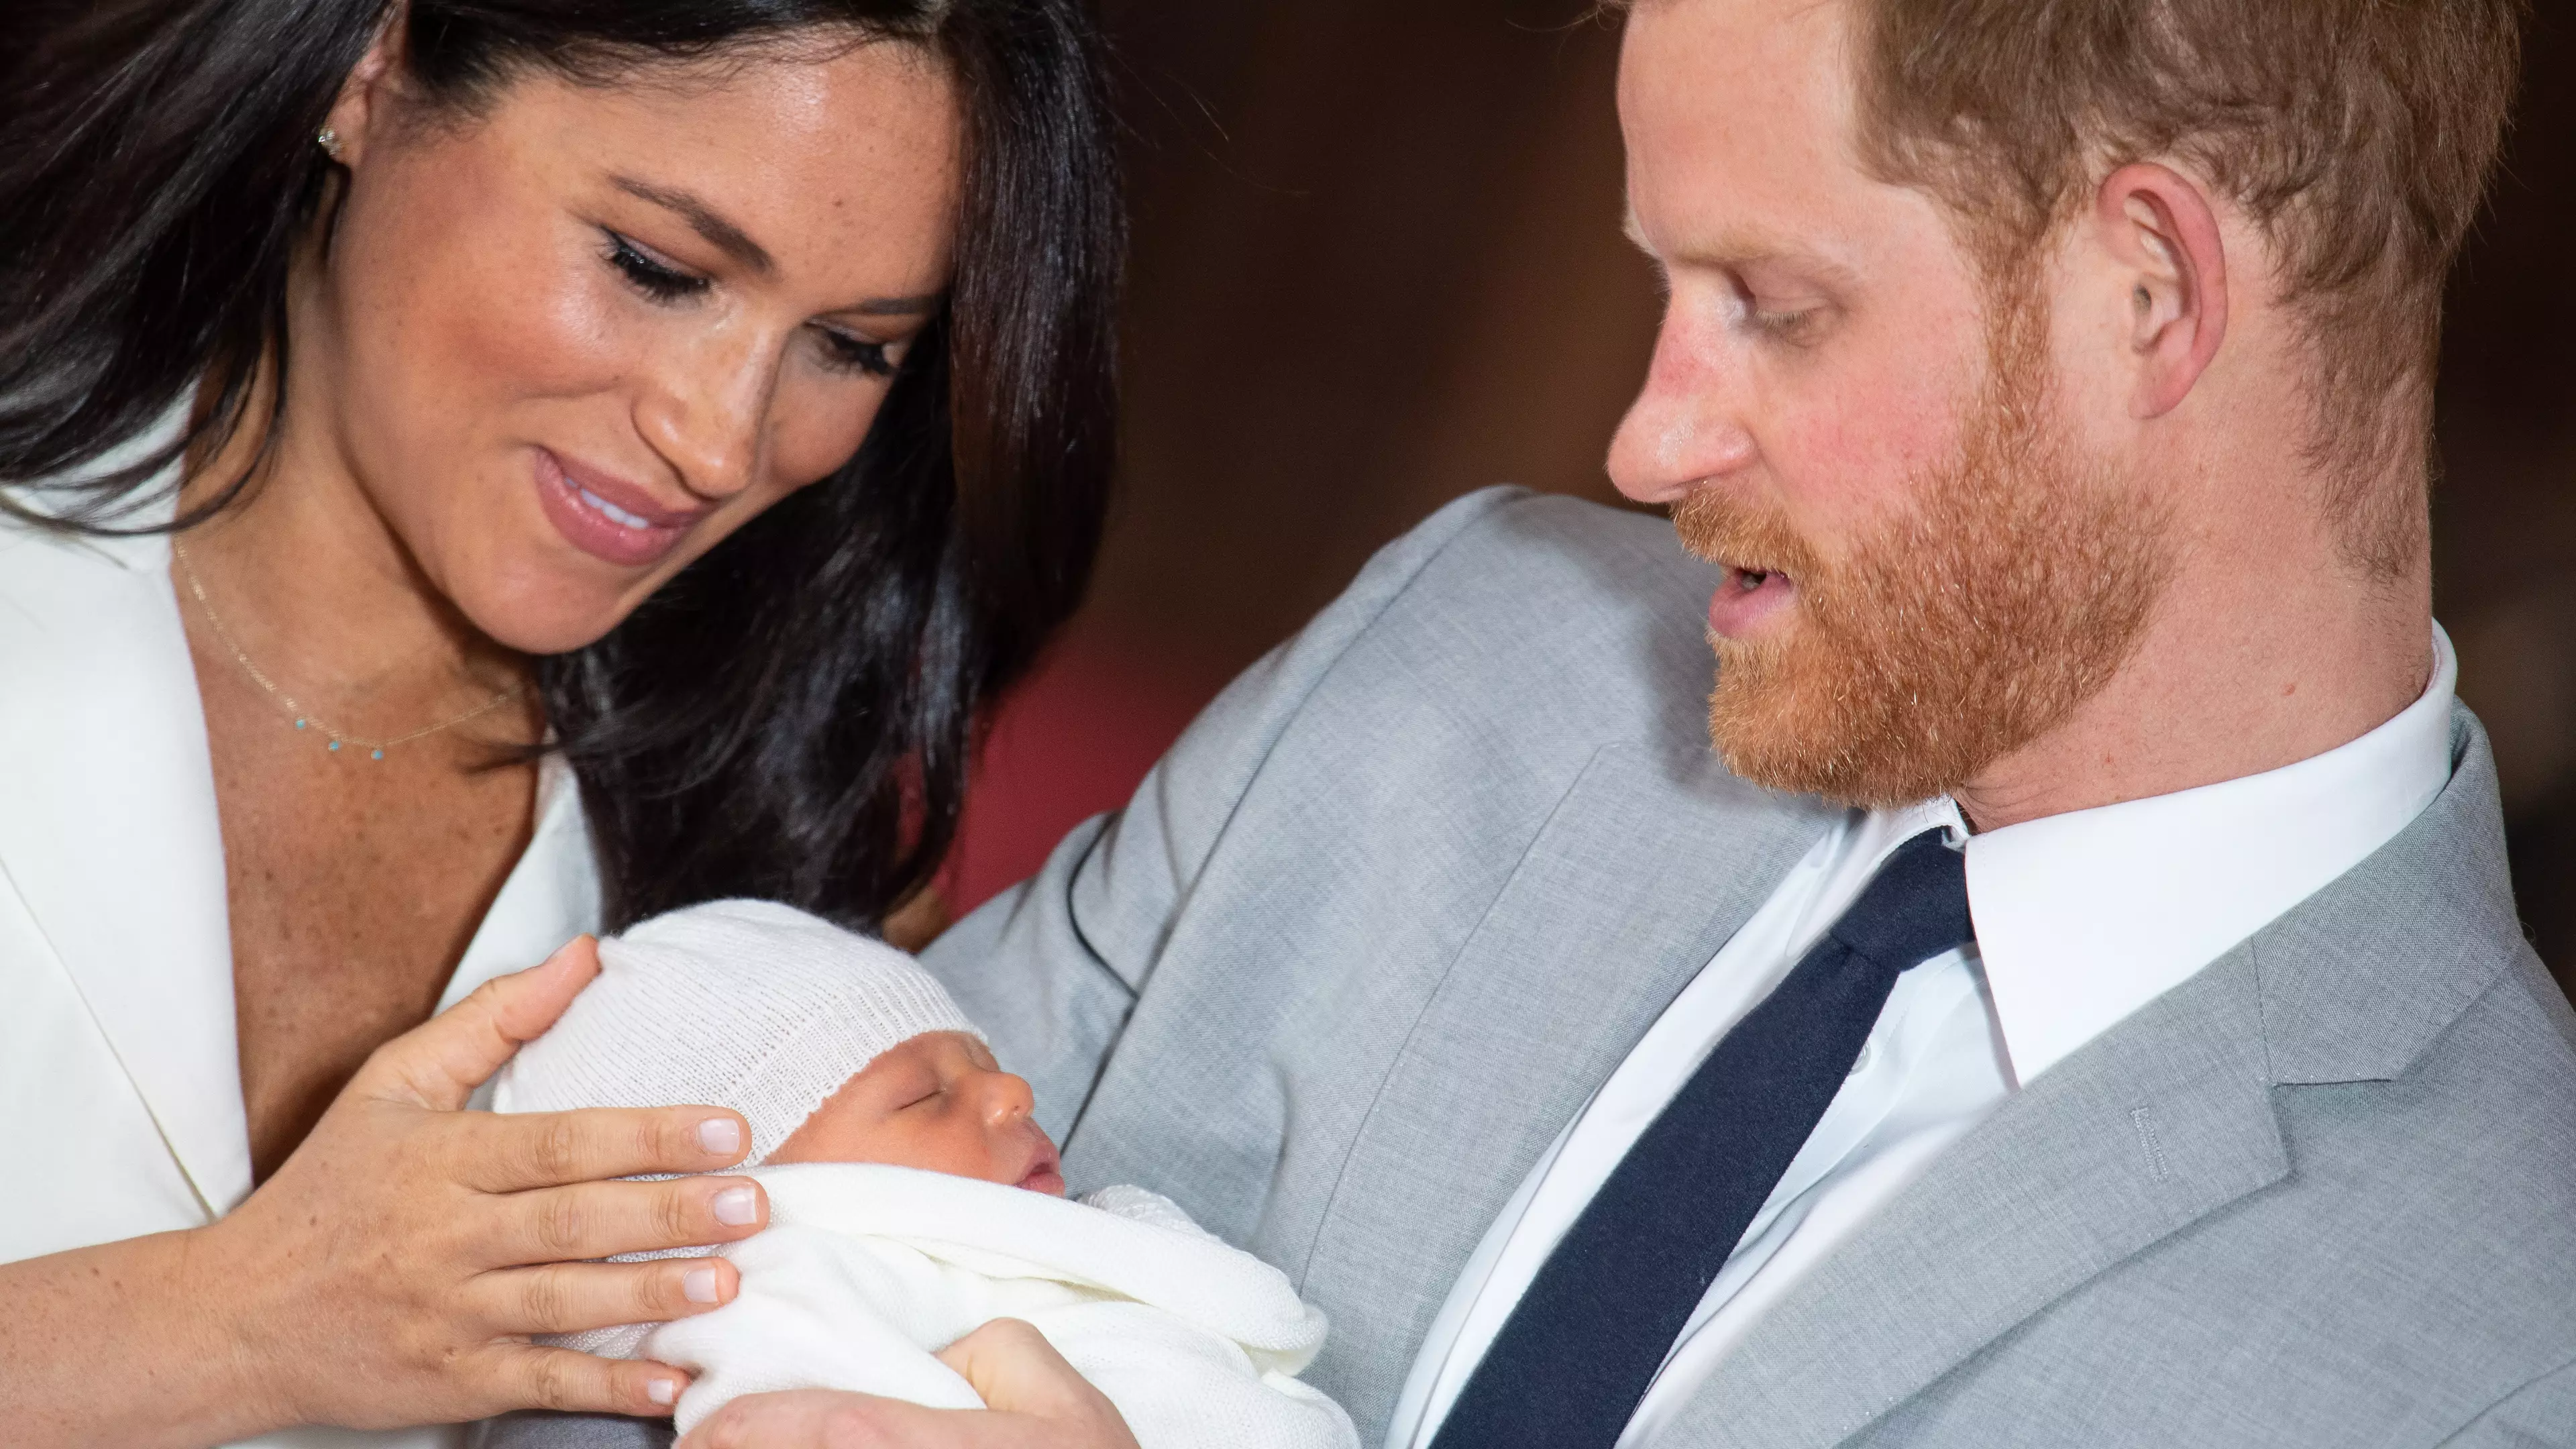 This Is Why Baby Archie Harrison Mountbatten-Windsor Doesn't Have A Royal Title